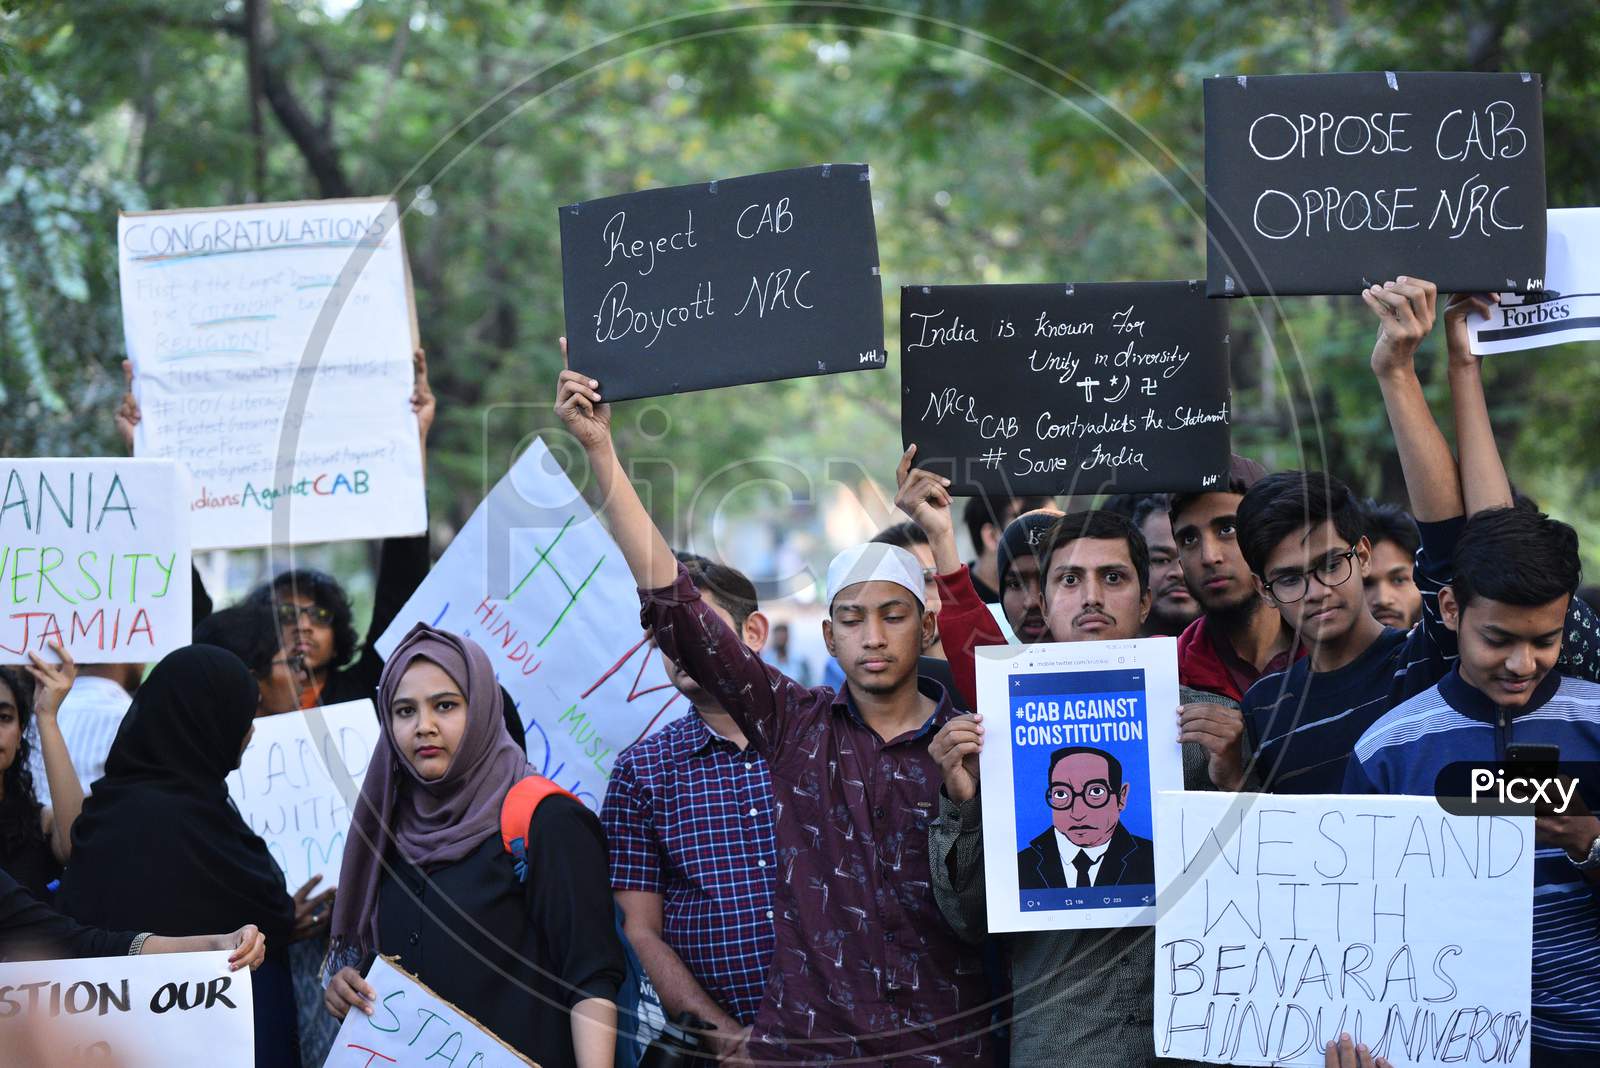 Students from EFLU, HCU and OU gathered at arts college to protest against Citizenship amendment act 2019